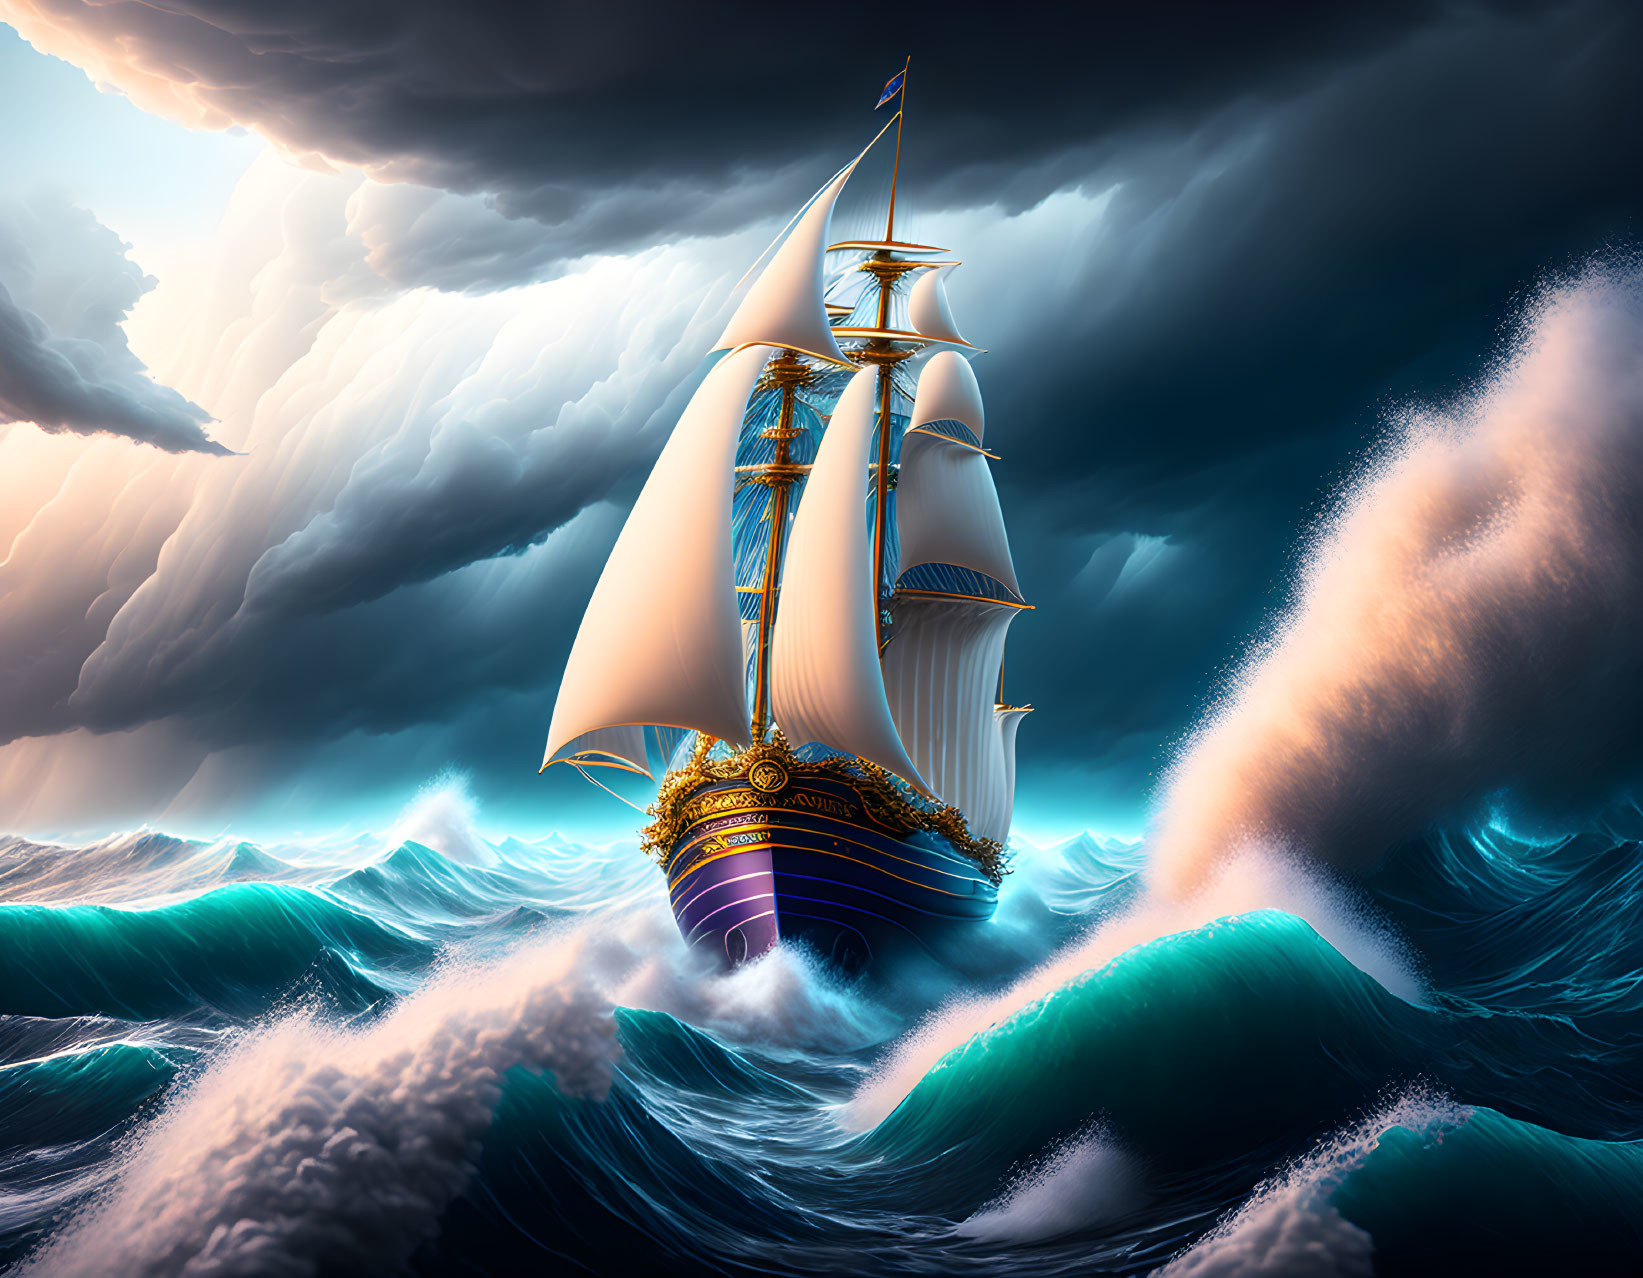 Sailing ship in turbulent seas with billowing sails and stormy skies